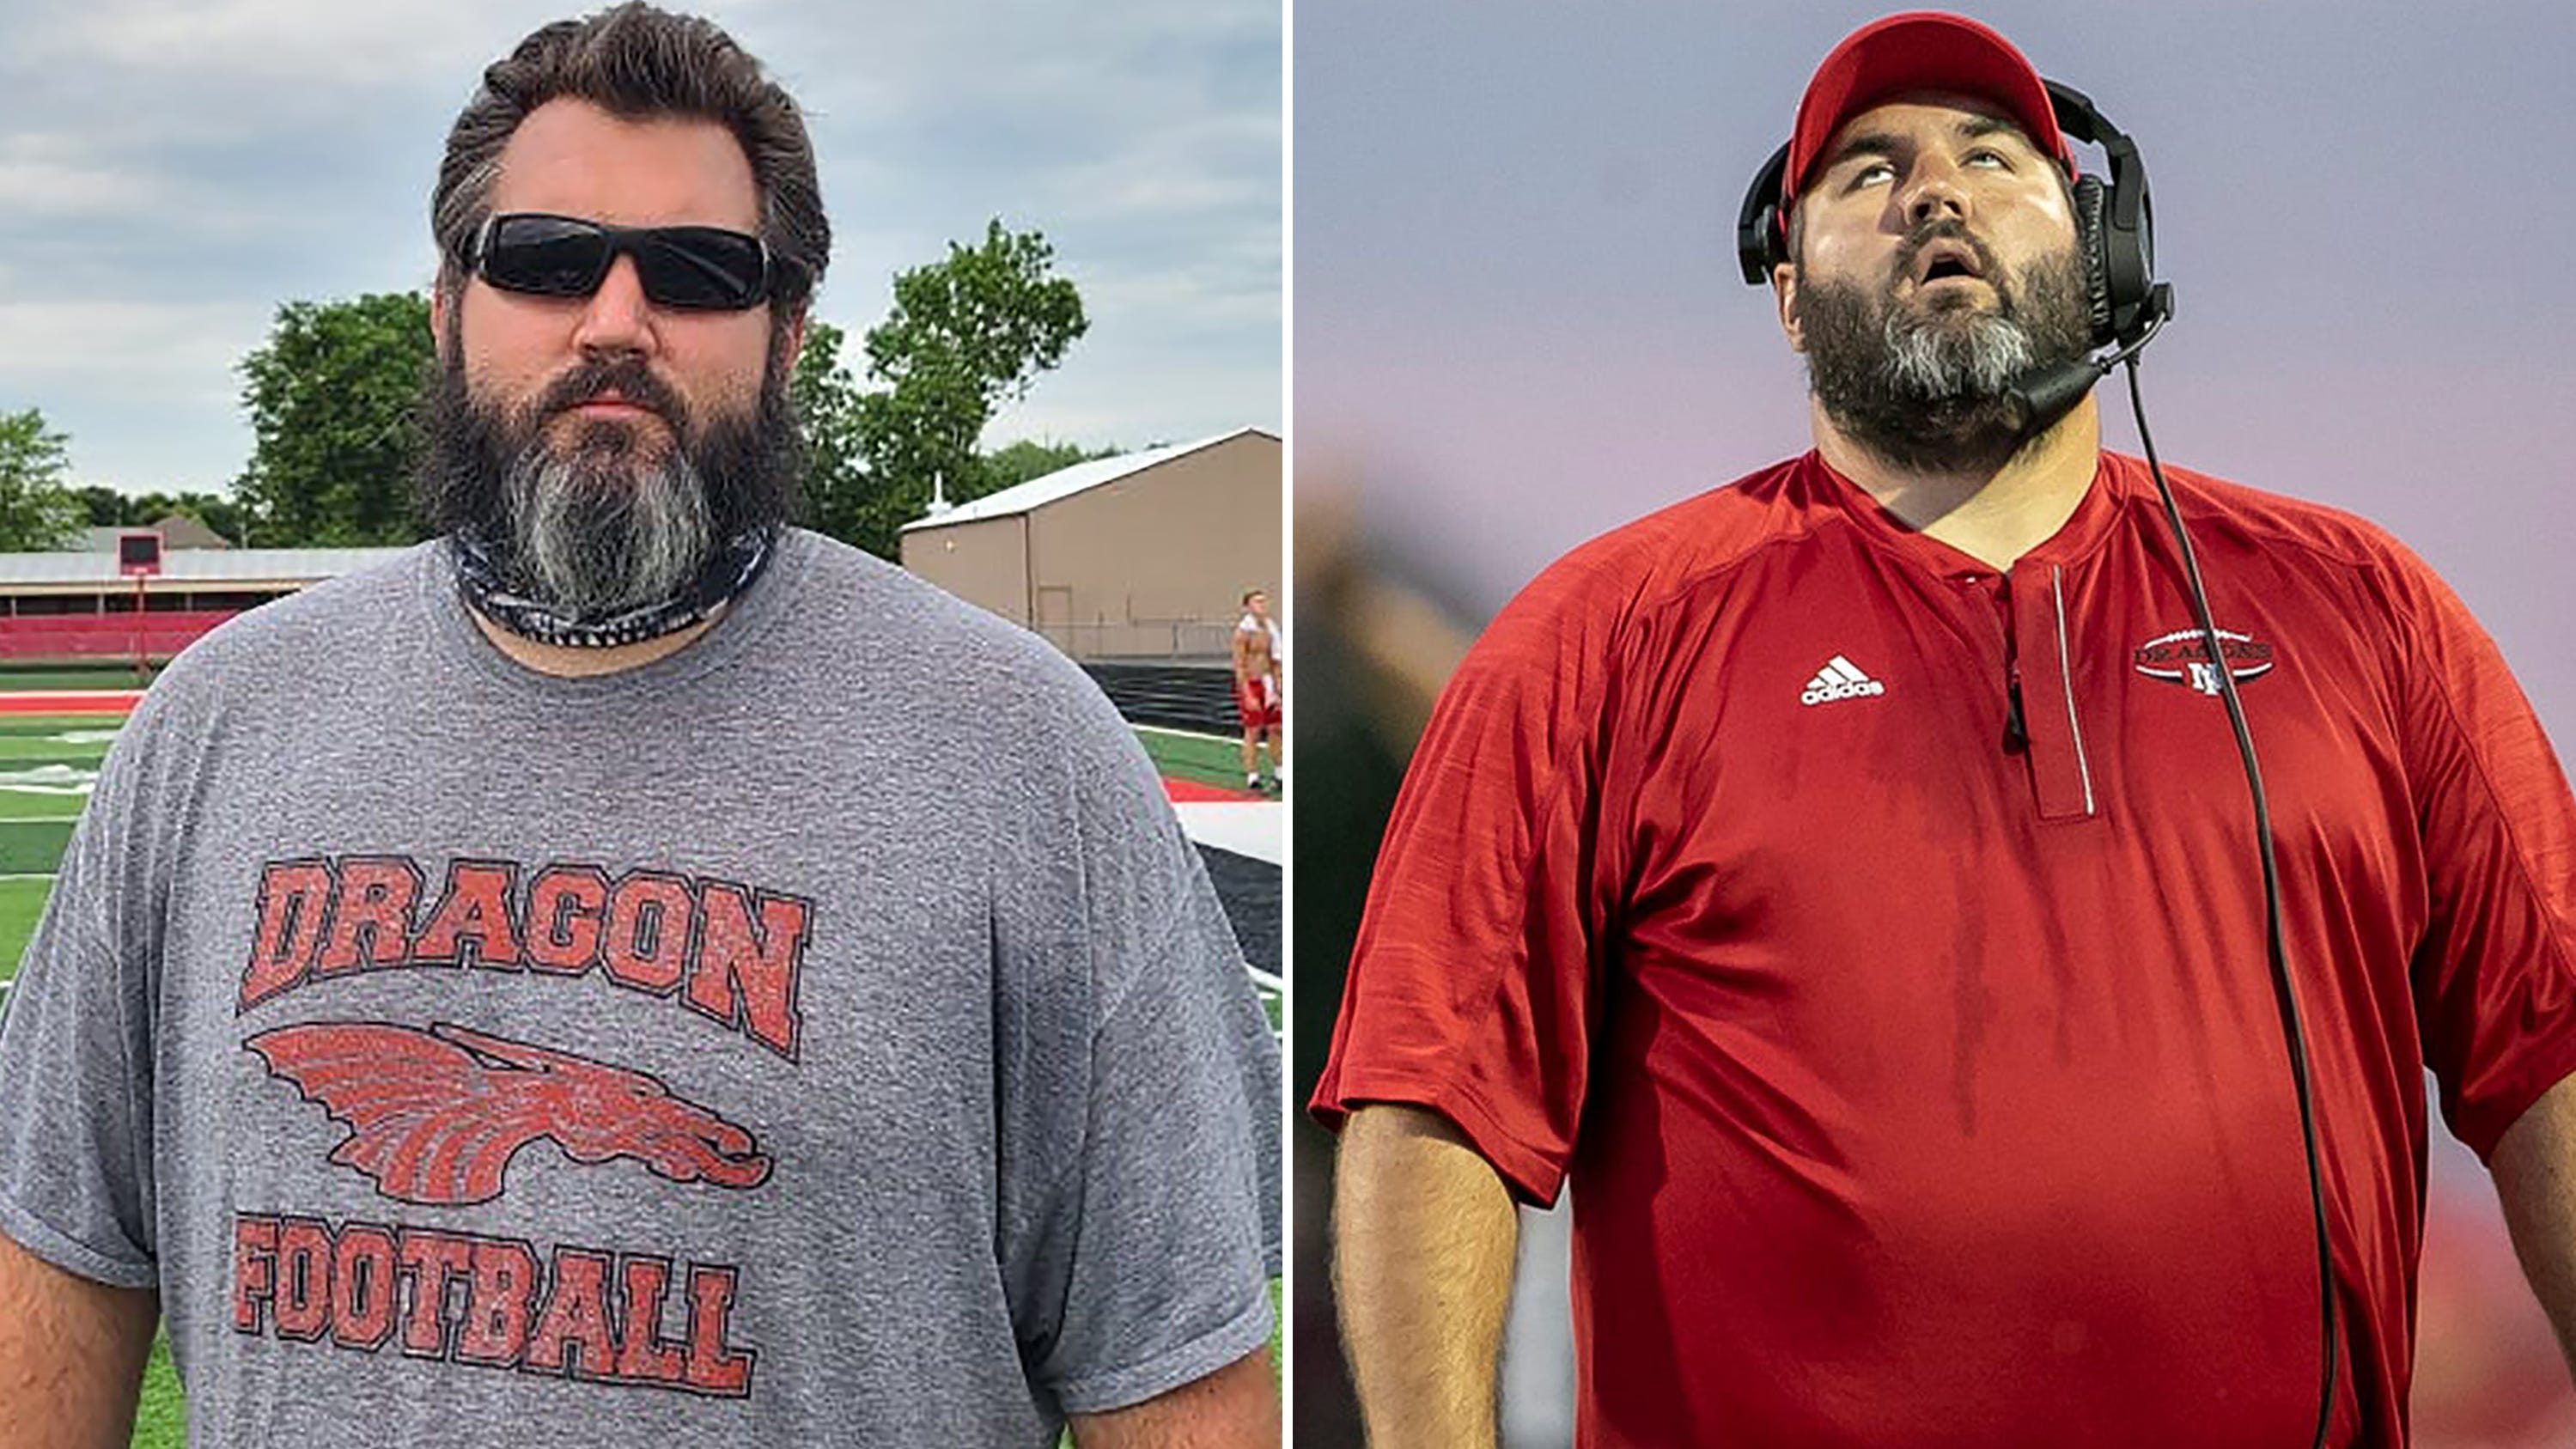 Former UNC OL, New Palestine football coach Kyle Ralph down 77 pounds since March